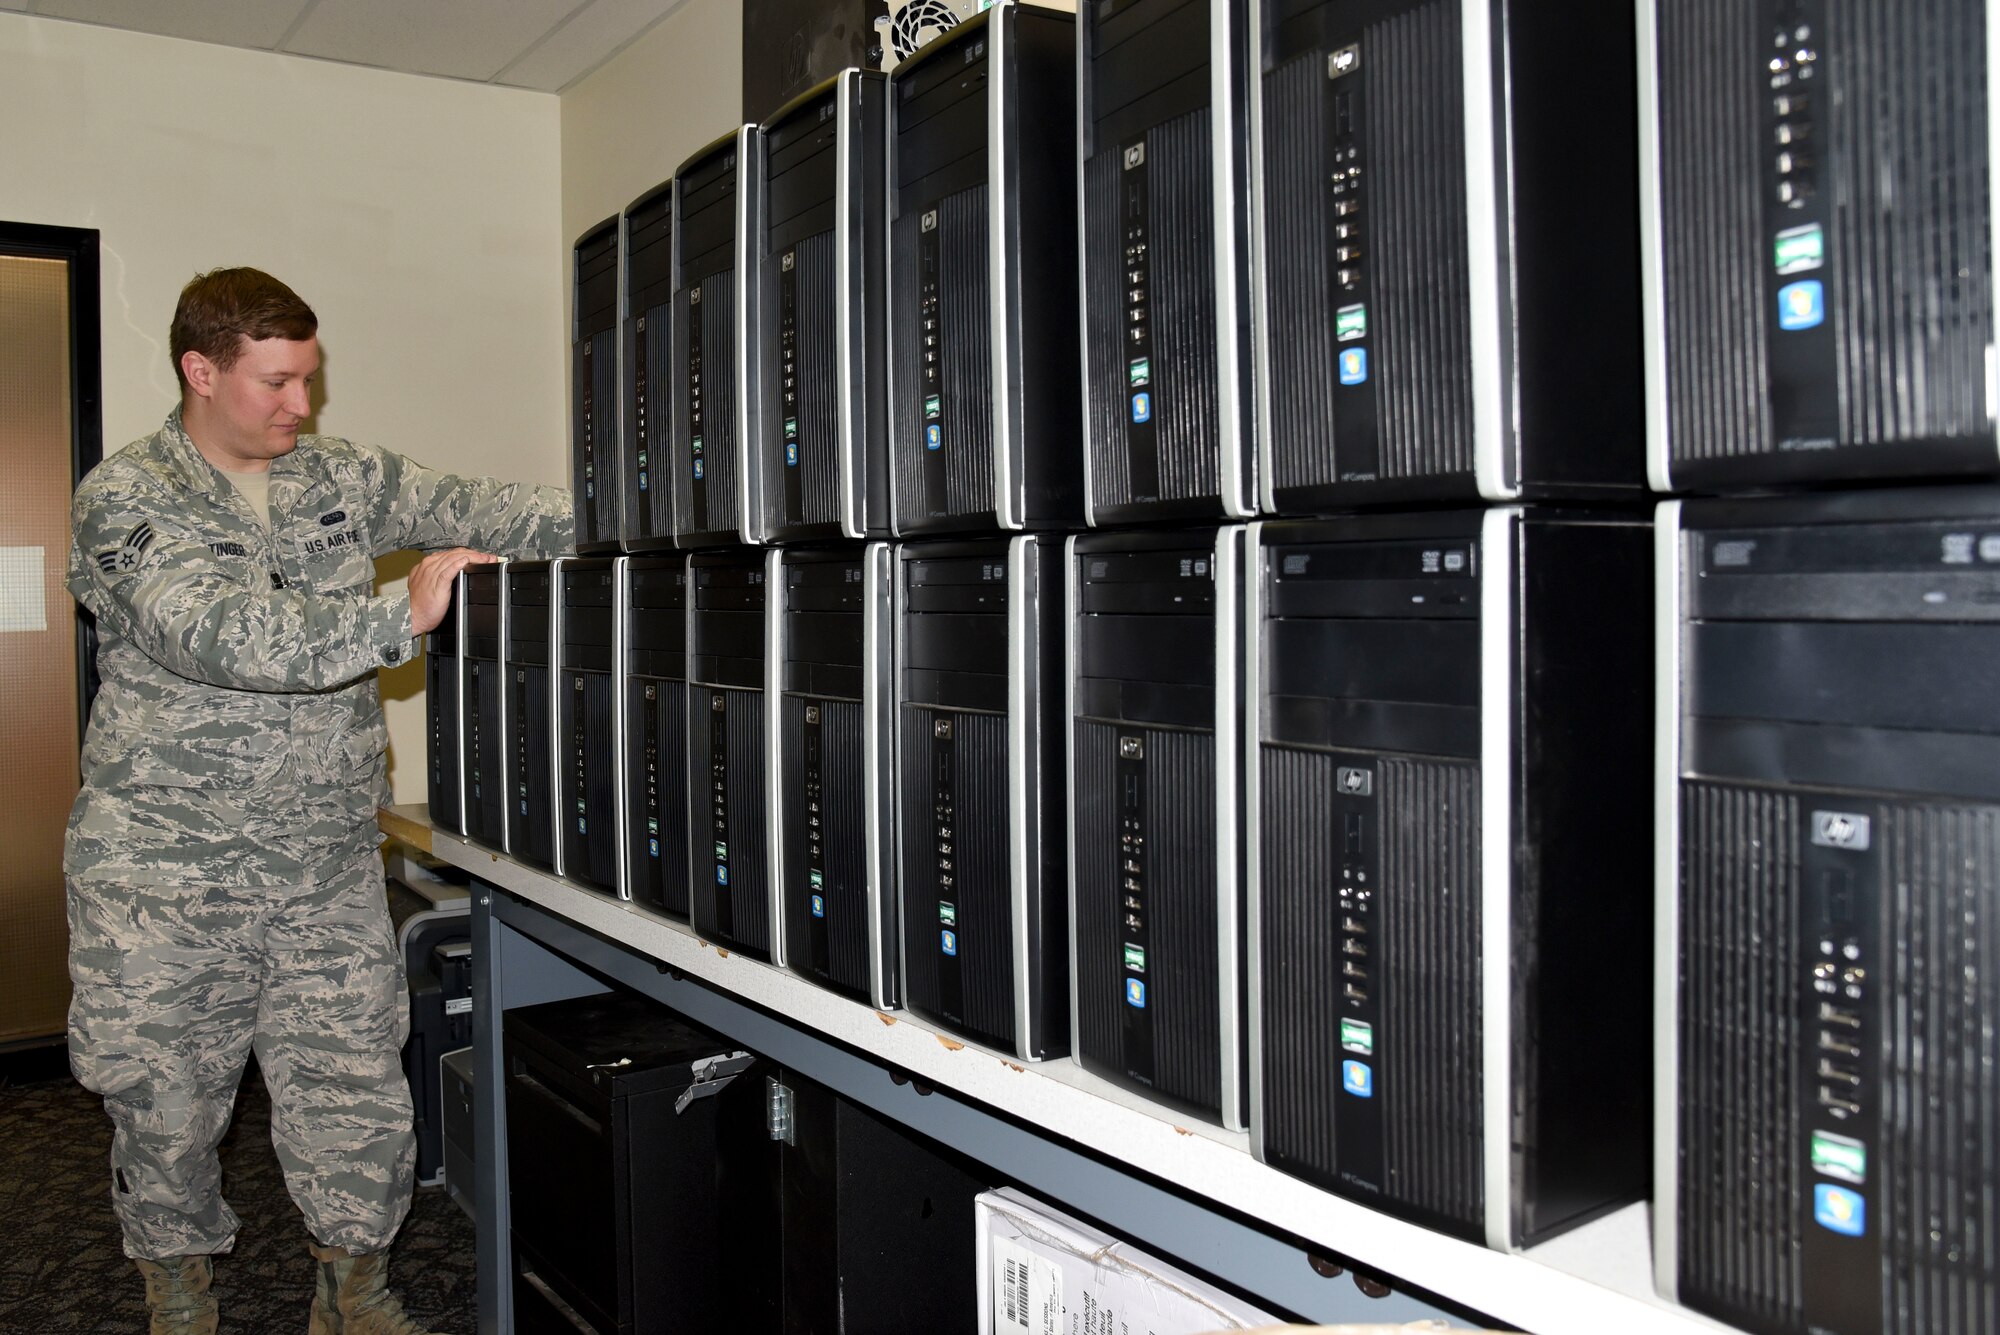 Senior Airman Bradly Stinger, 92nd Communications Squadron client systems technician, checks the serial numbers on the computers for the base's technology refresh Oct. 29, 2015, at Fairchild Air Force Base, Wash. Technology refresh is a process Information Technology Asset Management does to replace old computers with new ones, which happens all year. Stinger is one of the many Airmen who are responsible for troubleshooting and repairing any computer issues base personnel may have. (U.S. Air Force photo/Senior Airman Janelle Patiño)